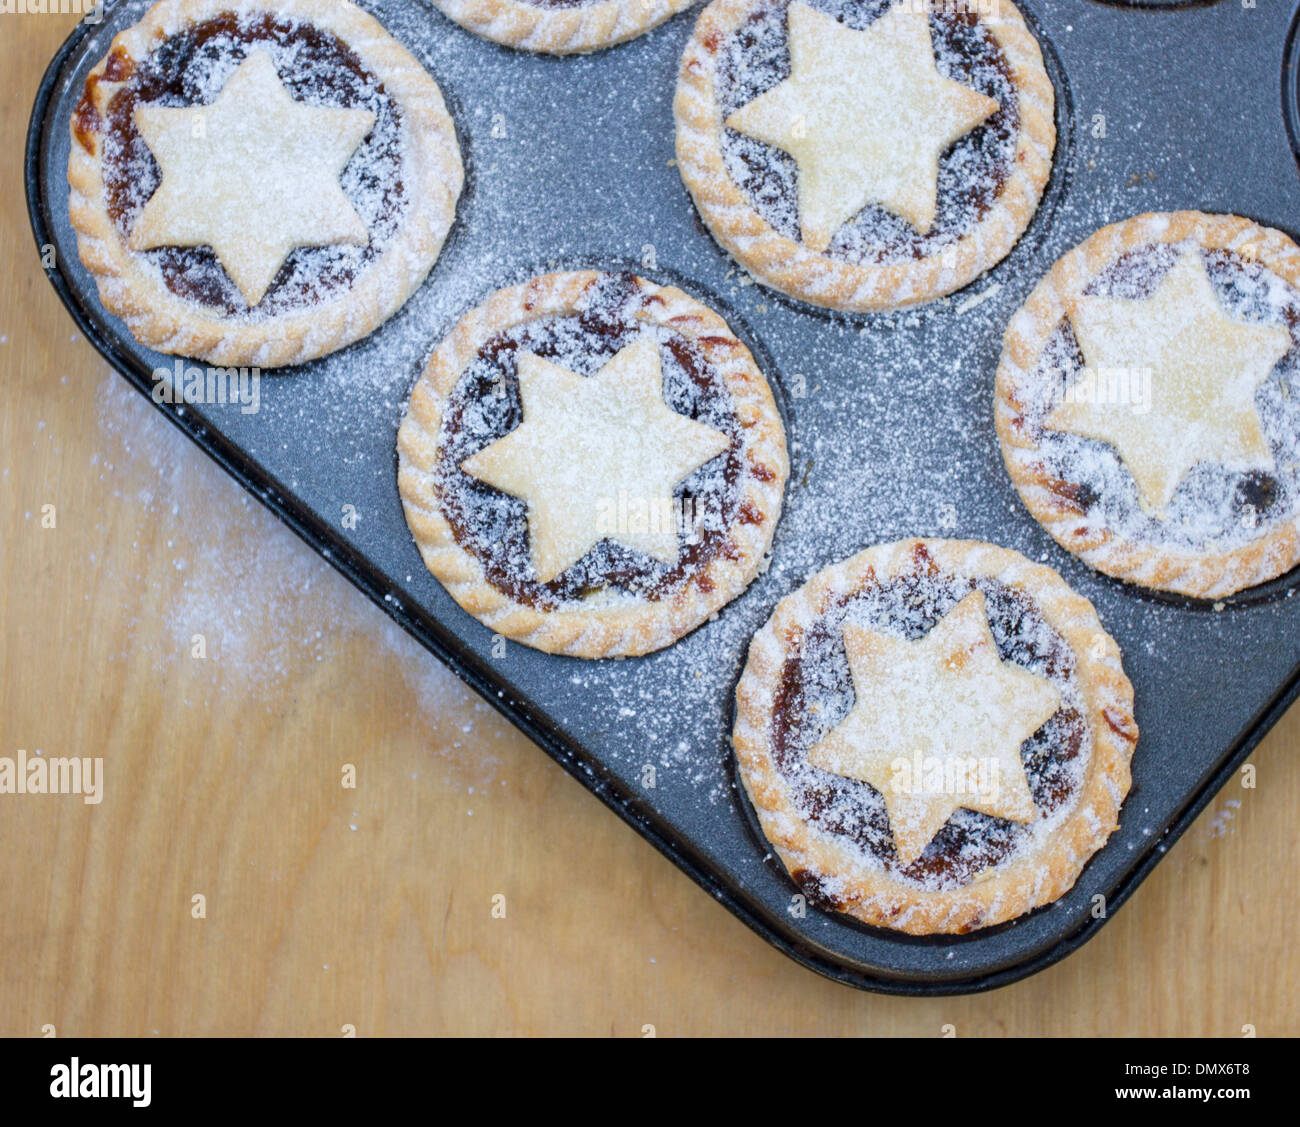 Homemade icing sugar dusted mince pies in baking tray Stock Photo